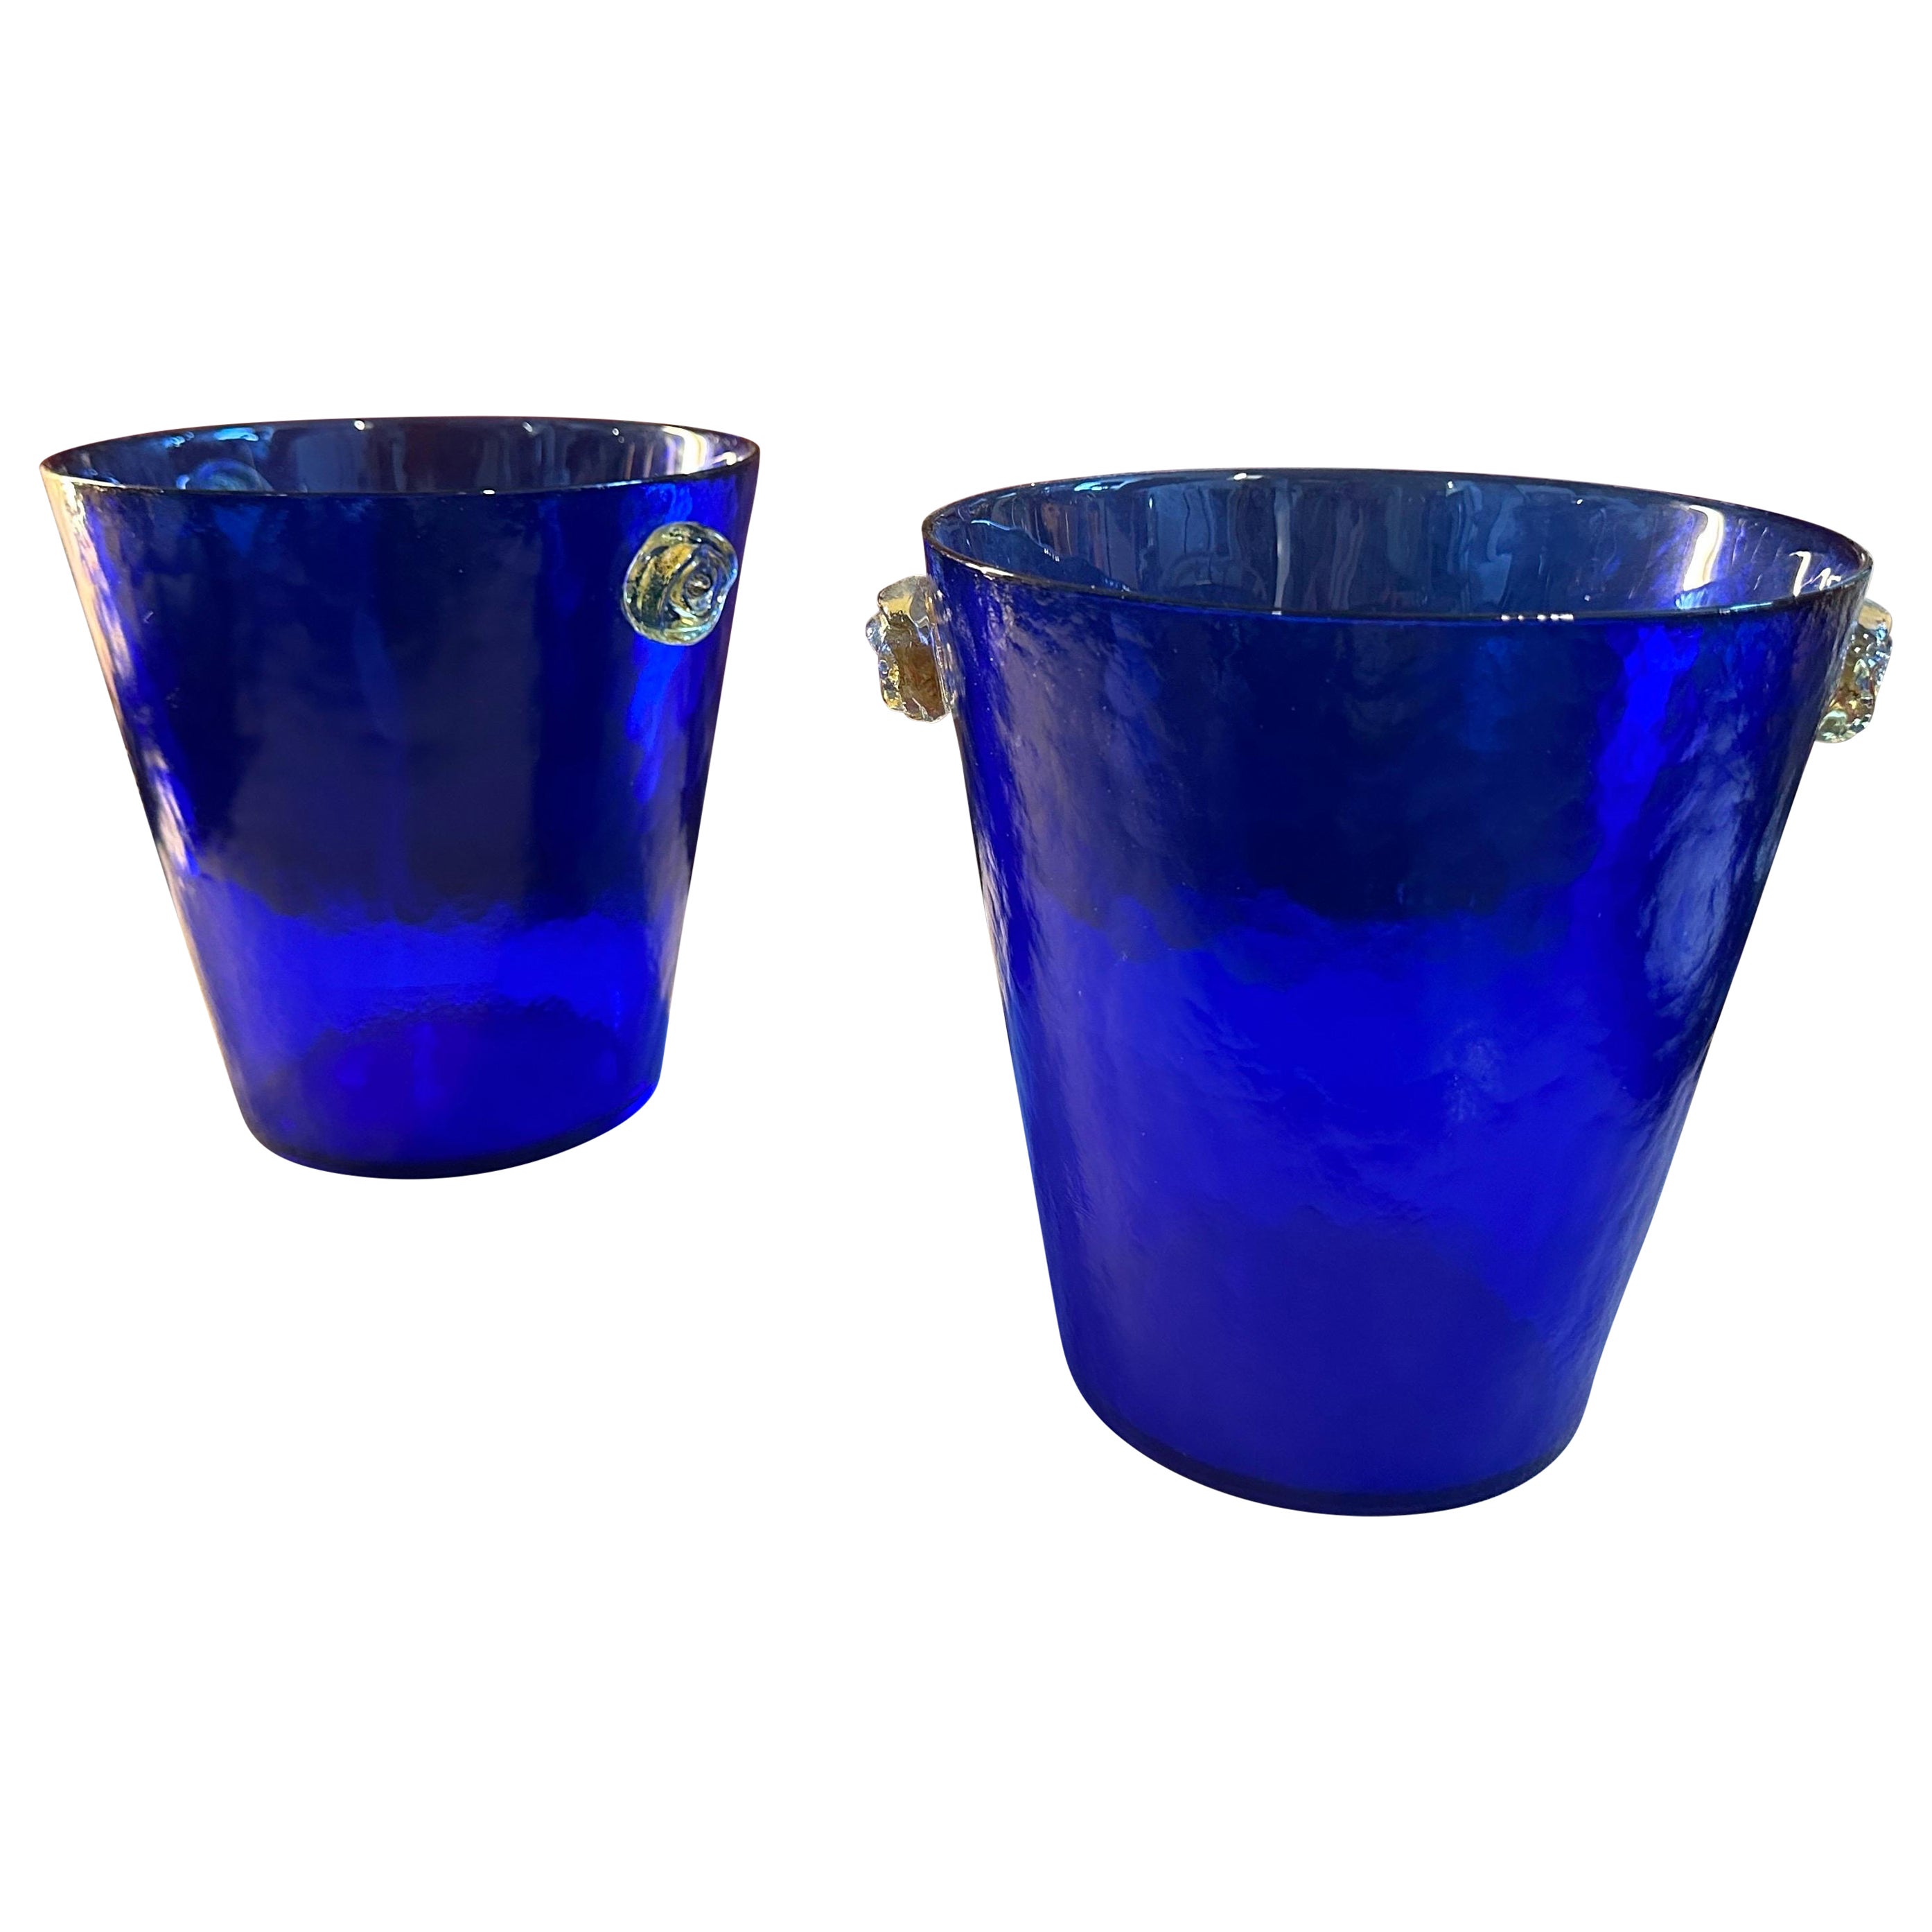 A Pair of 1980s Venini Style Modernist Blue and Yellow Murano Glass Wine Coolers For Sale